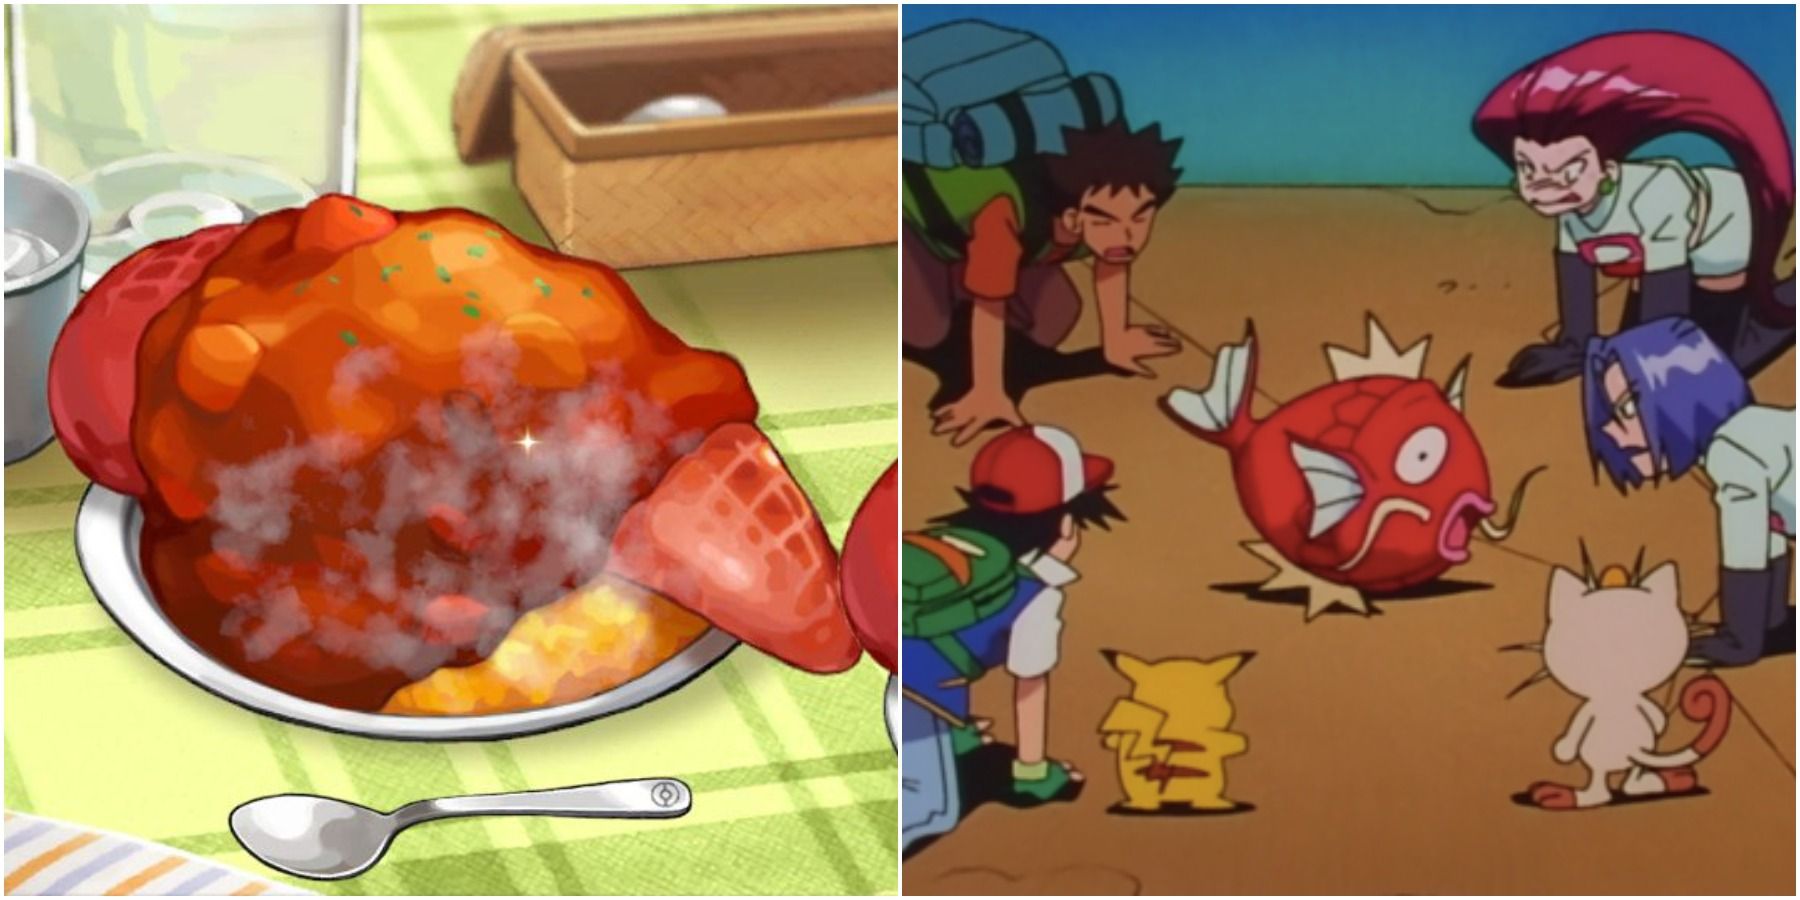 Split image of curry and anime characters surrounding Magikarp. 